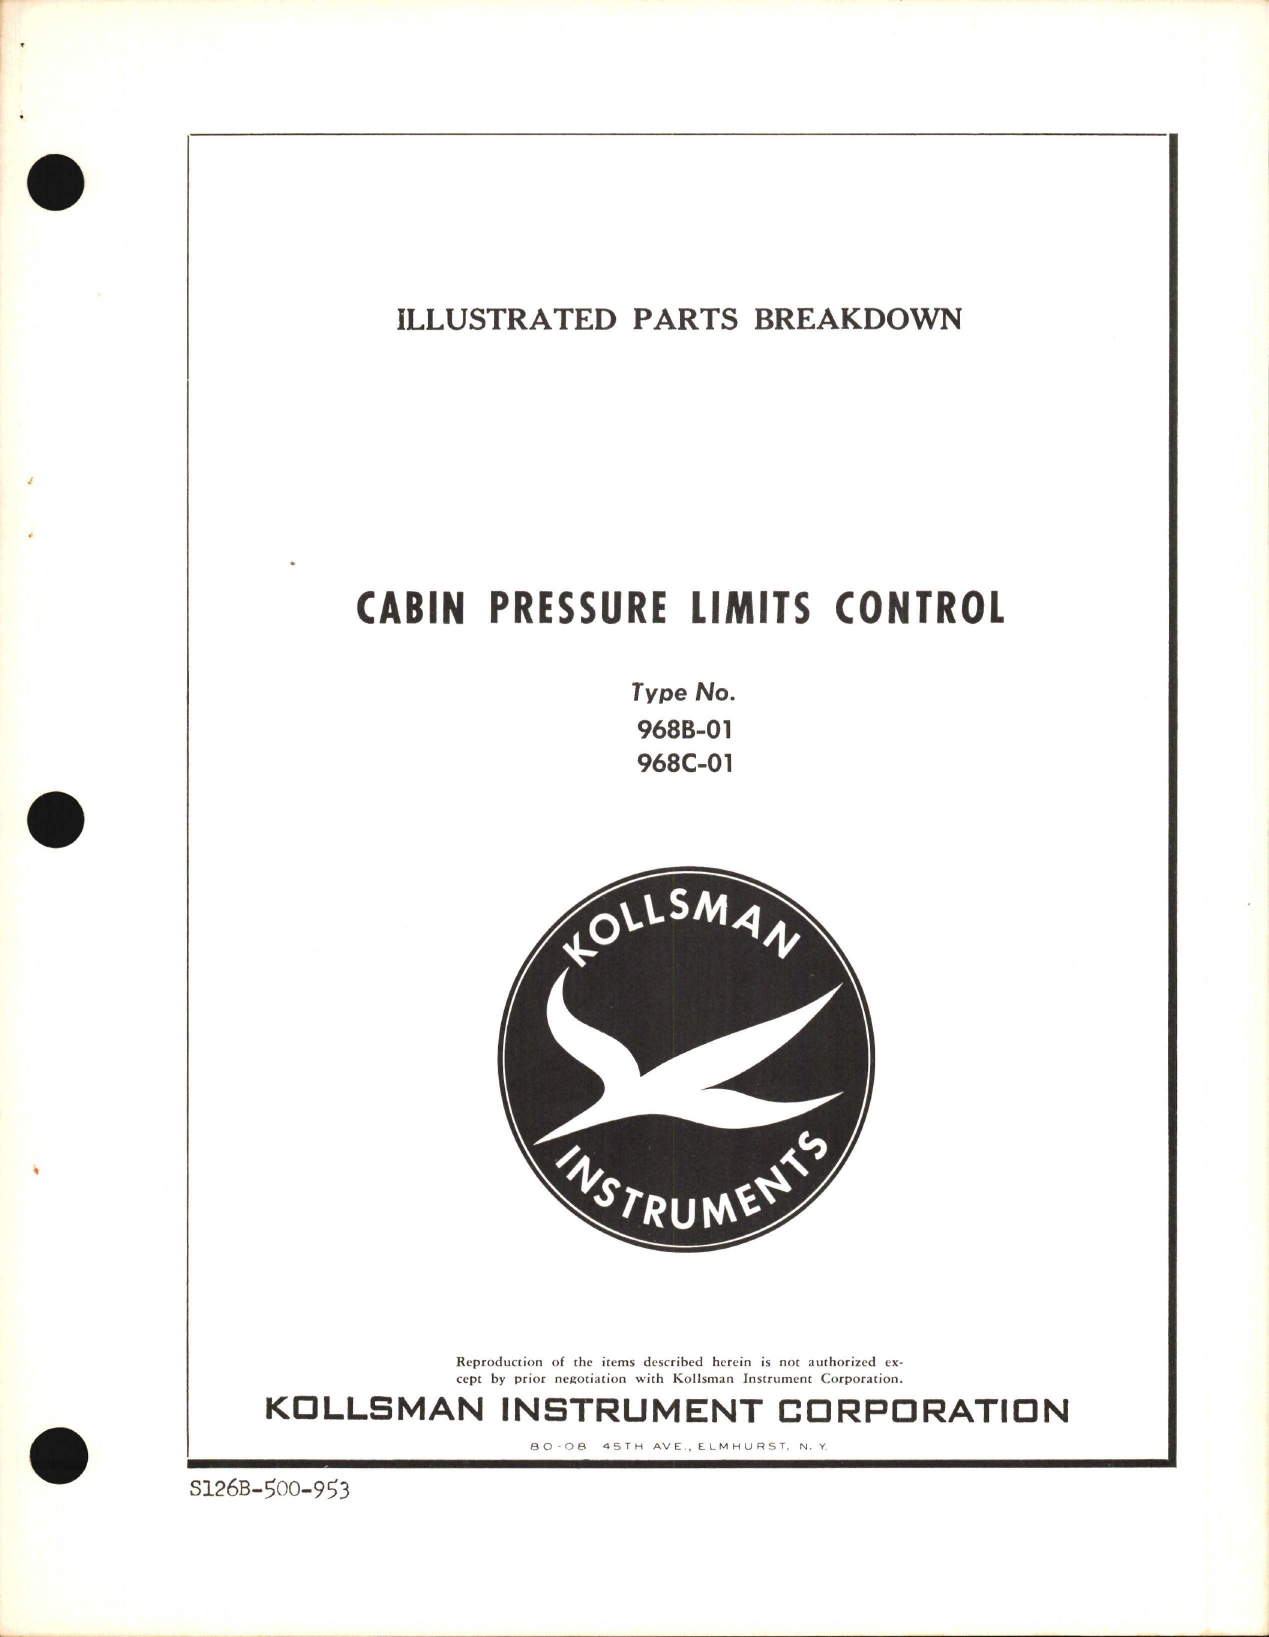 Sample page 1 from AirCorps Library document: Illustrated Parts Breakdown for Kollsman Cabin Pressure Limits Control